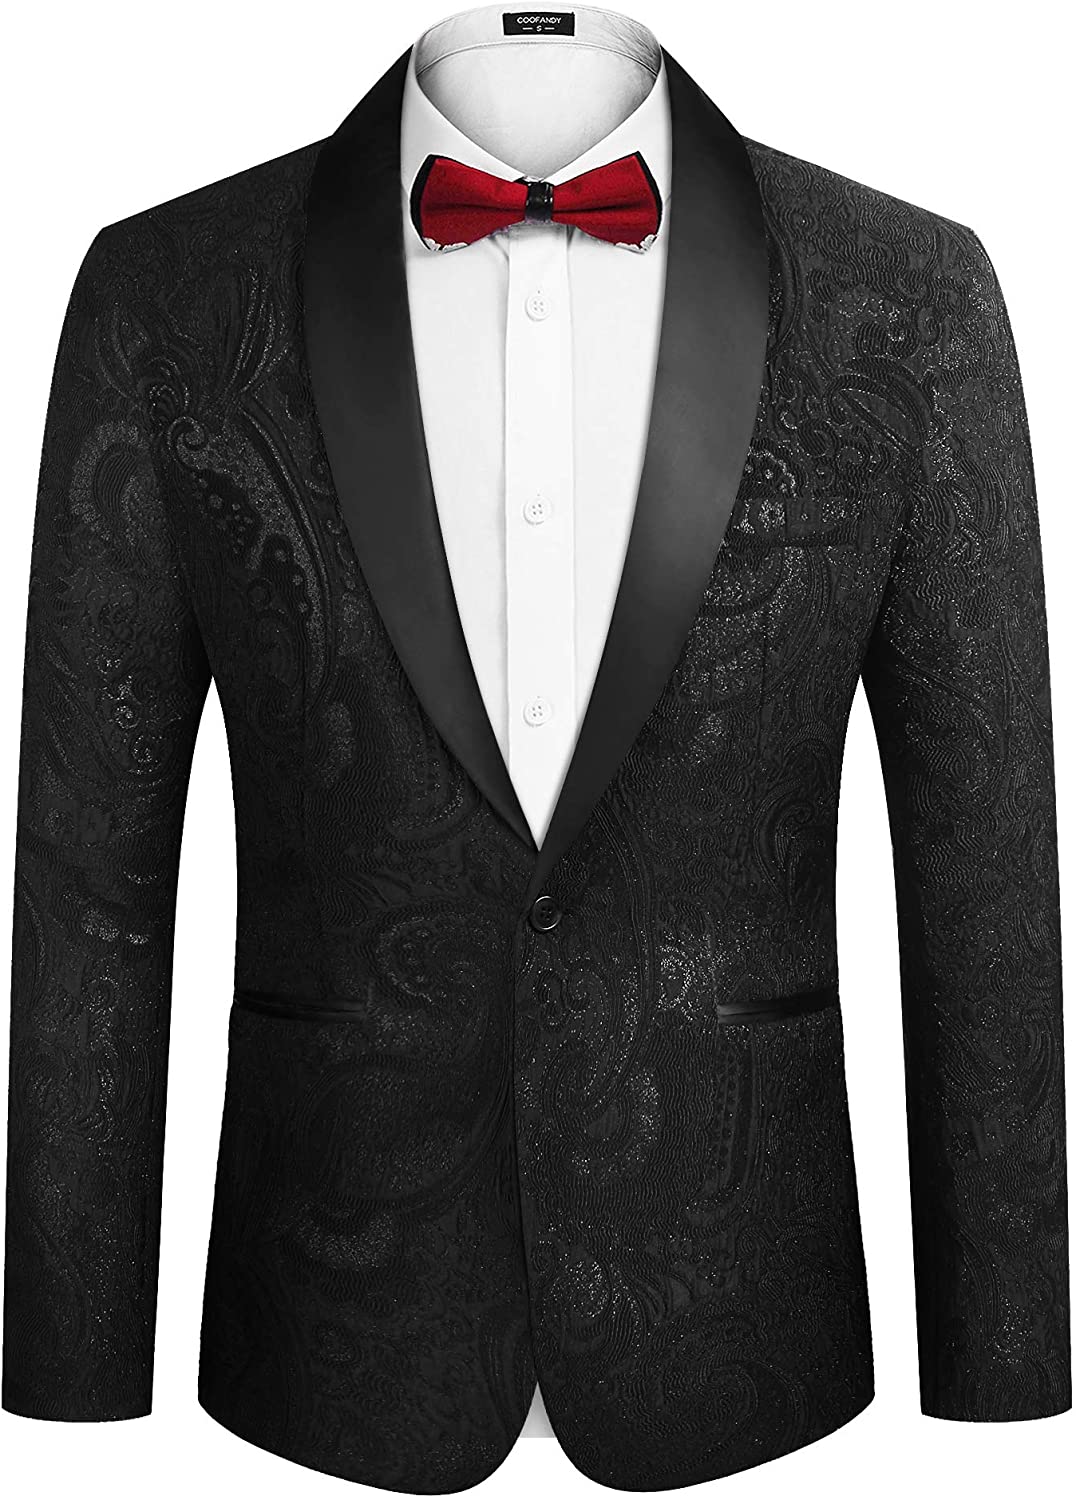 Pre-owned Visit The Coofandy Store Coofandy Men's Floral Dress Suit ...